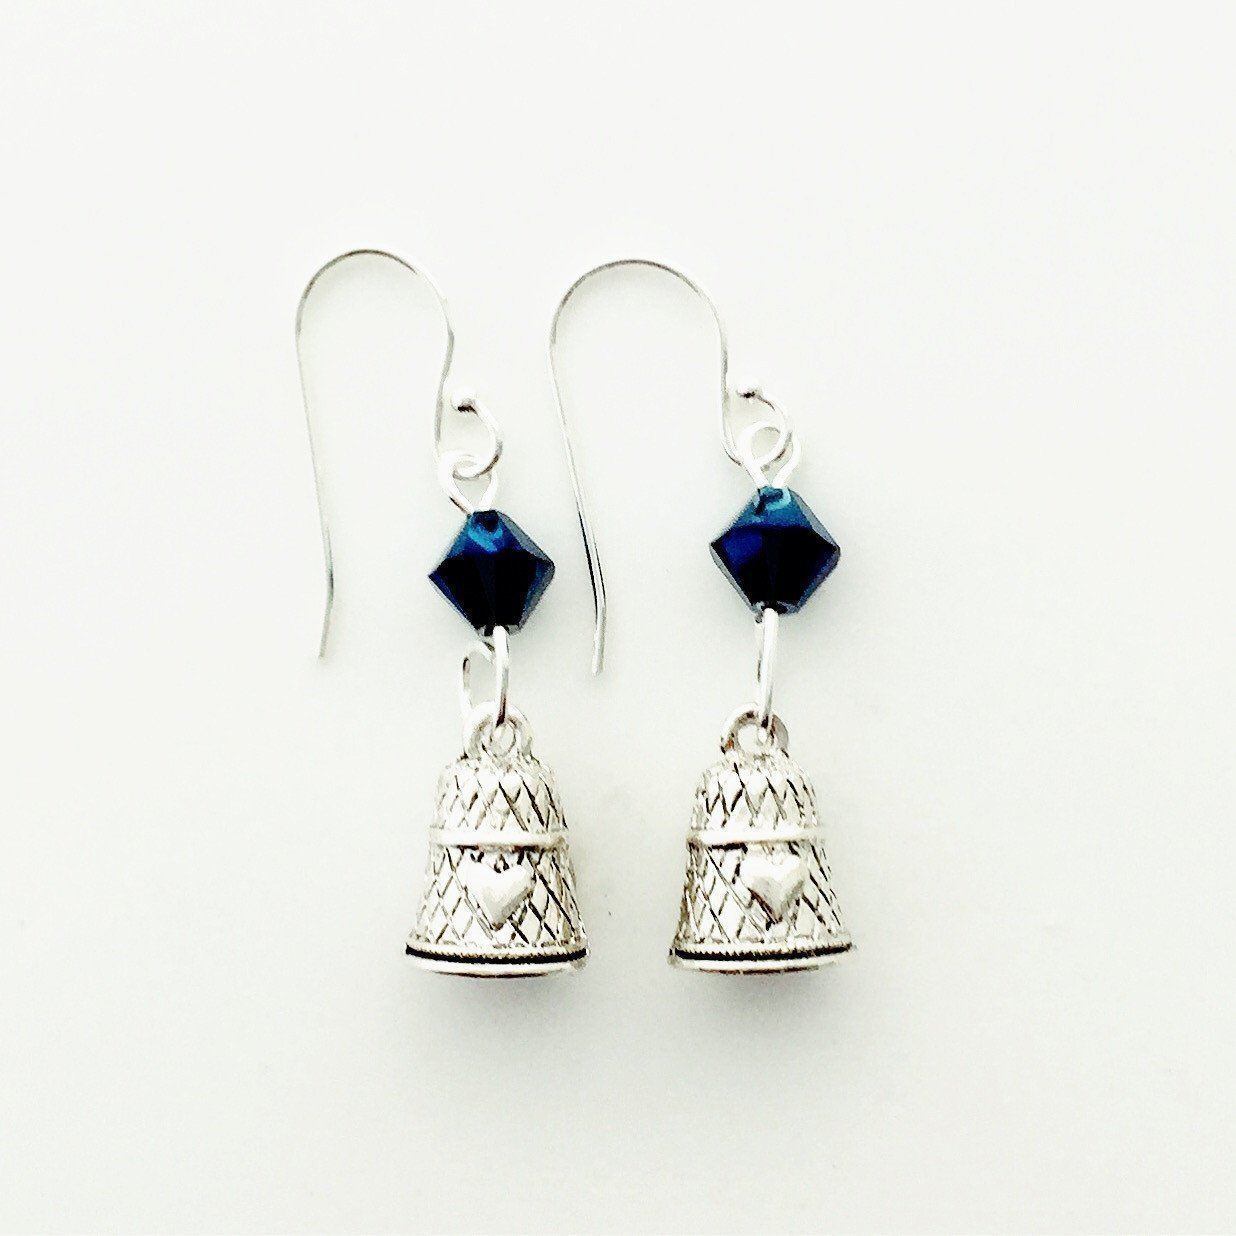 Thimble Silver Earrings with Blue Swarovski Crystals